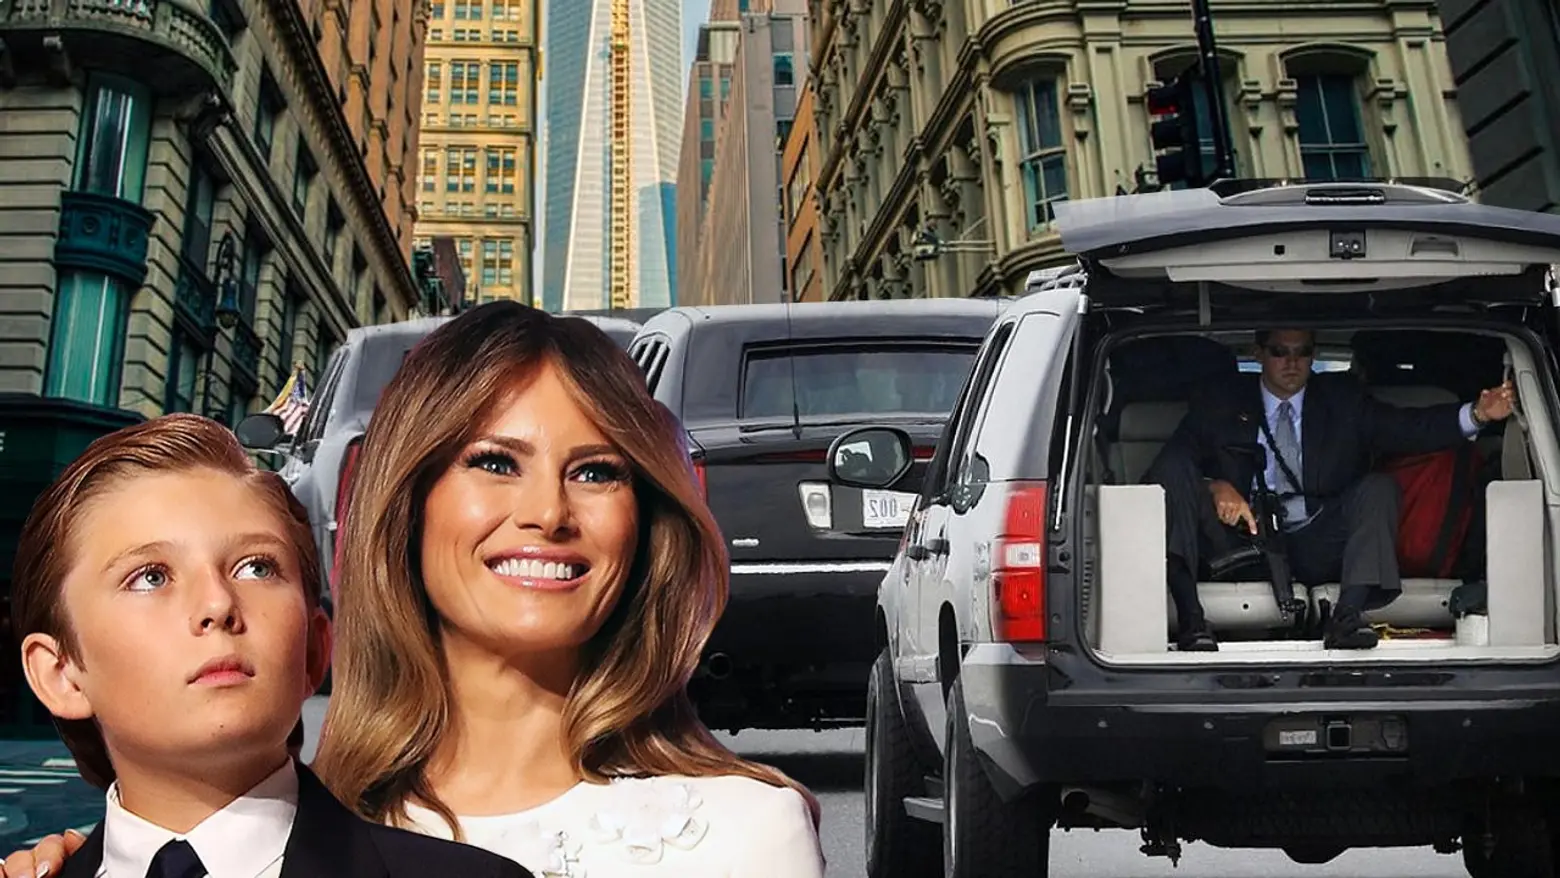 Petition started to force Melania Trump out of NYC